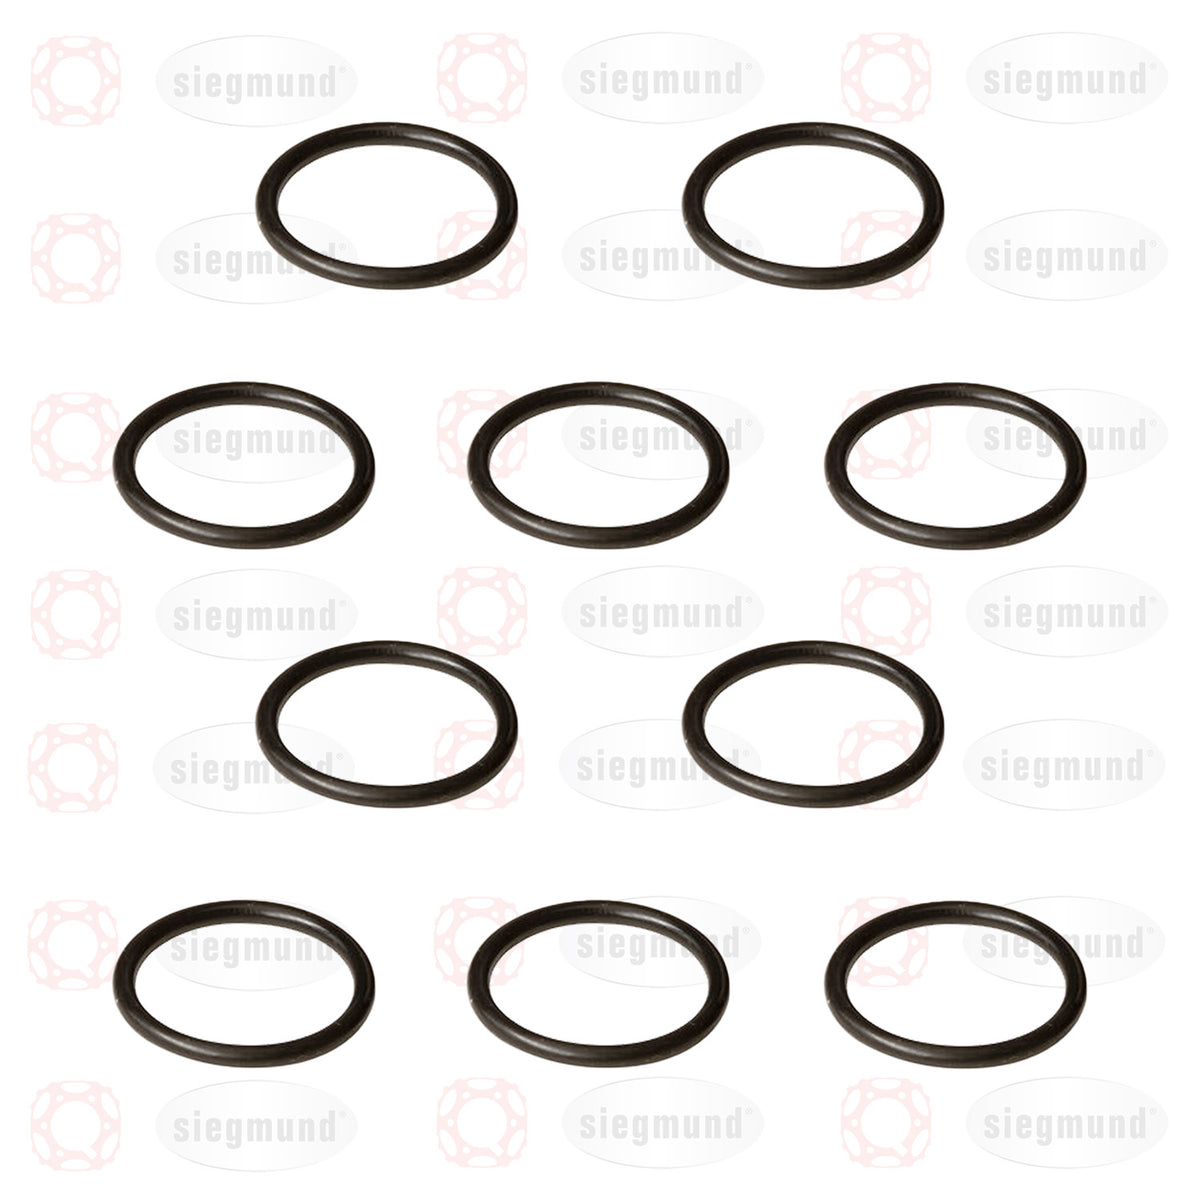 2-289009.10: Pack of 10 O-Rings for System 28 Welding Table Accessories